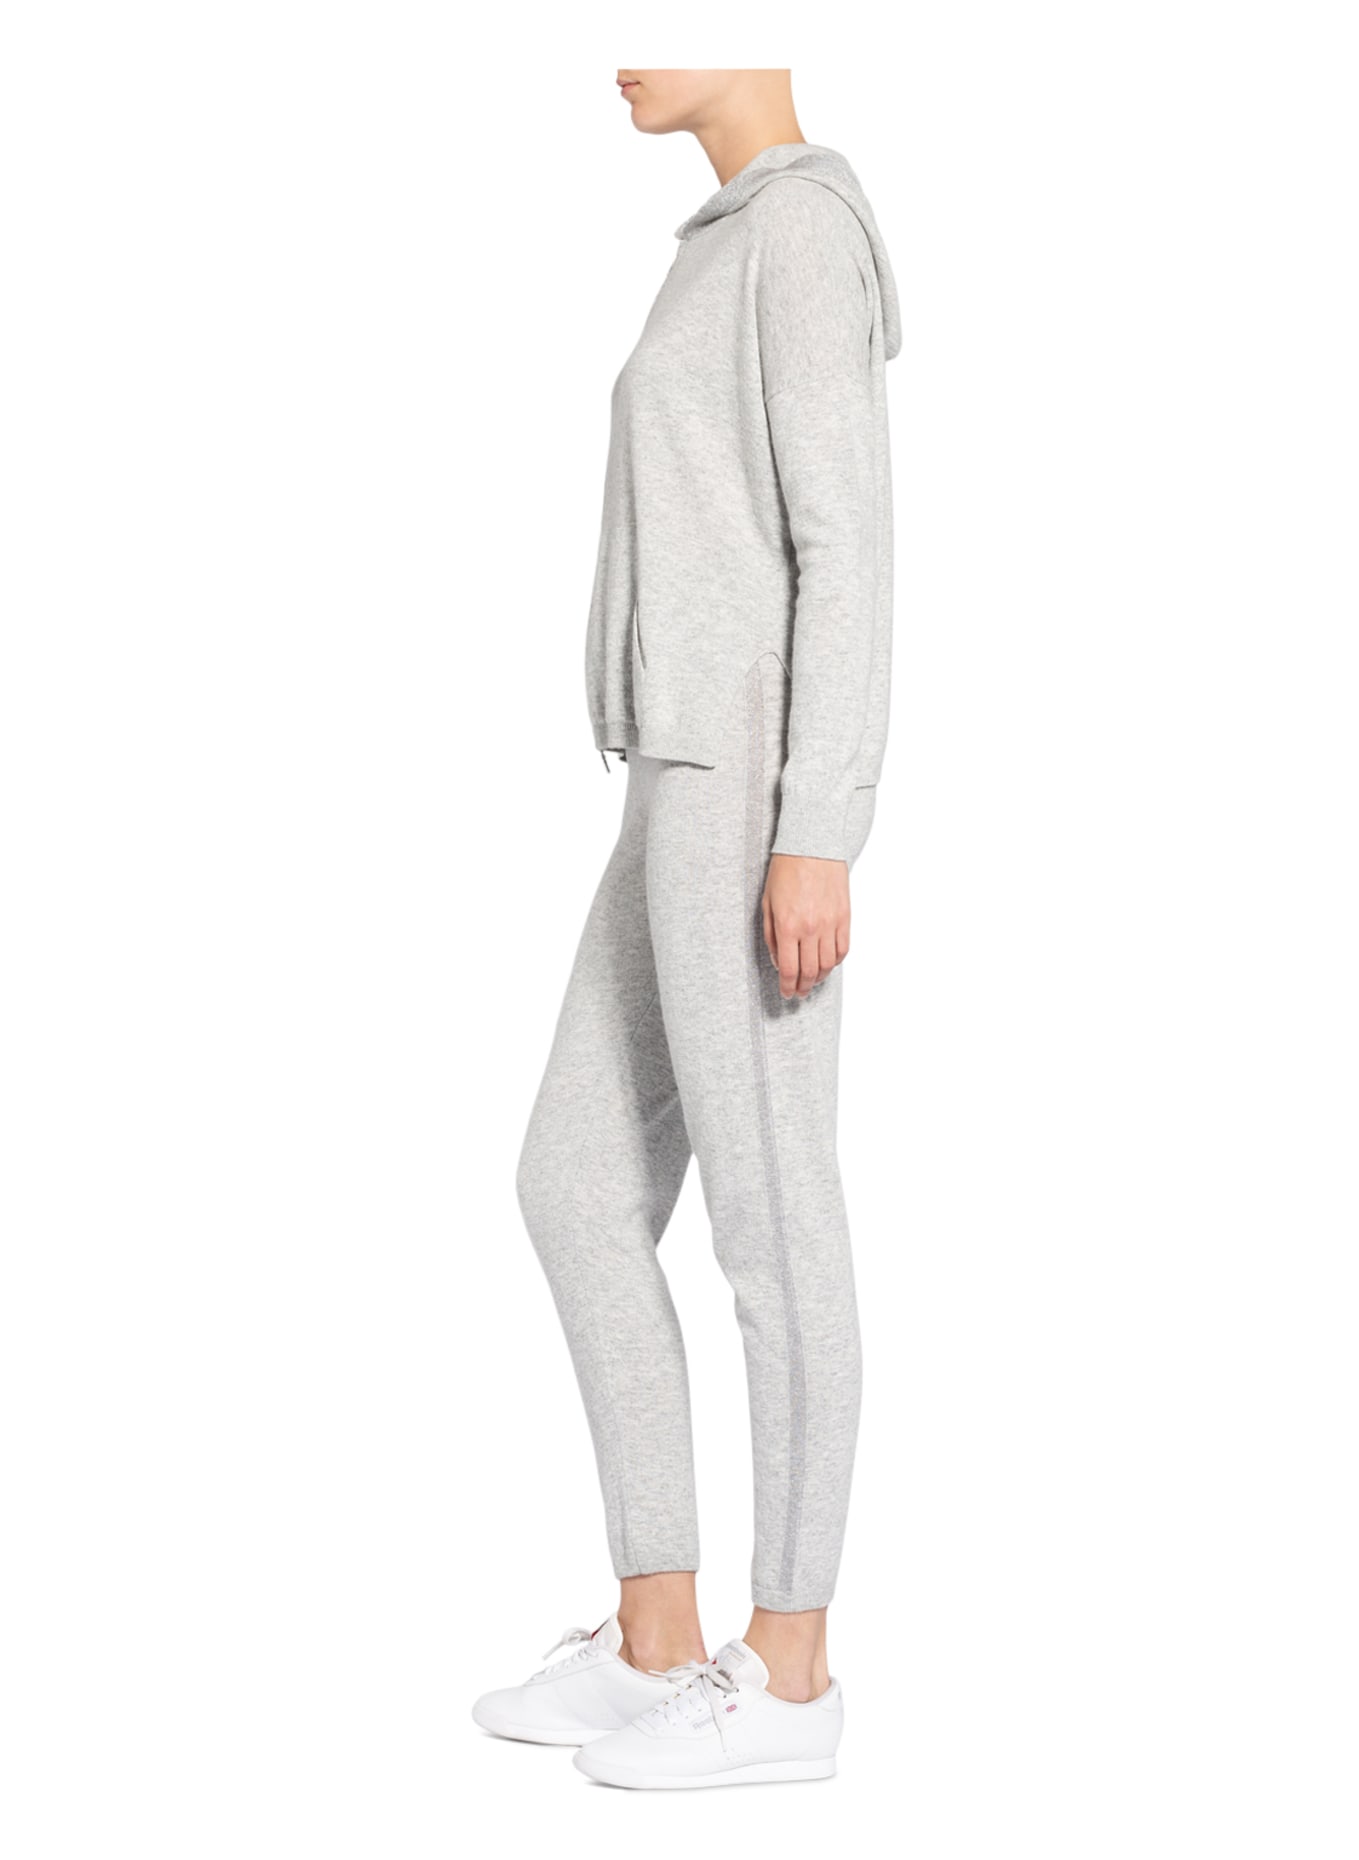 DEHA Knit fitness trousers, Color: LIGHT GRAY (Image 4)